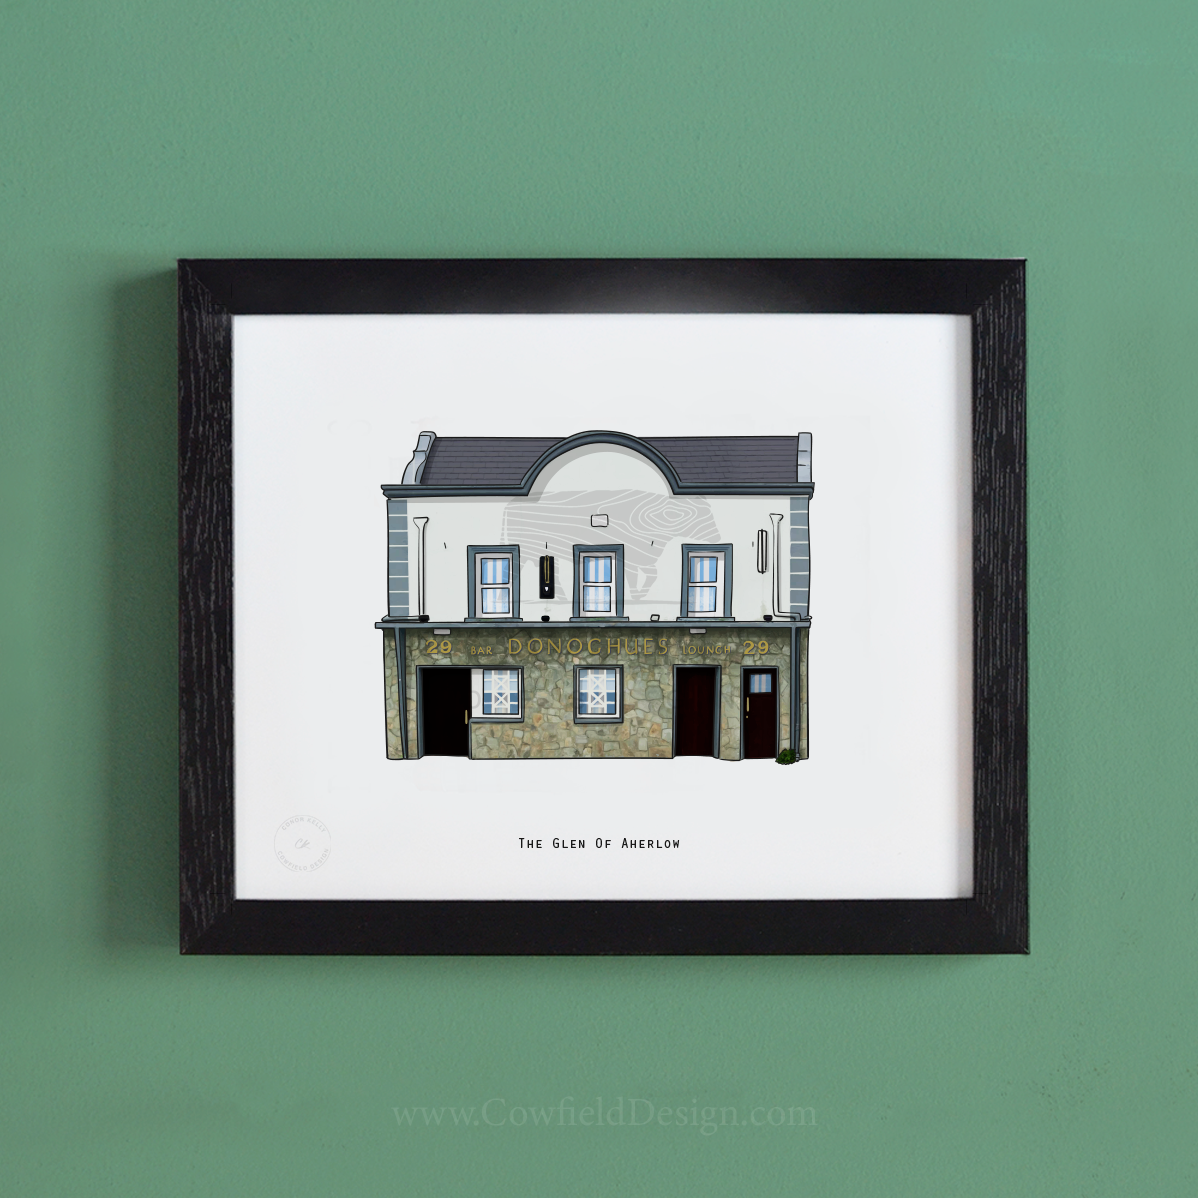 The Glen of Aherlow - Dublin Requested Pubs 5th